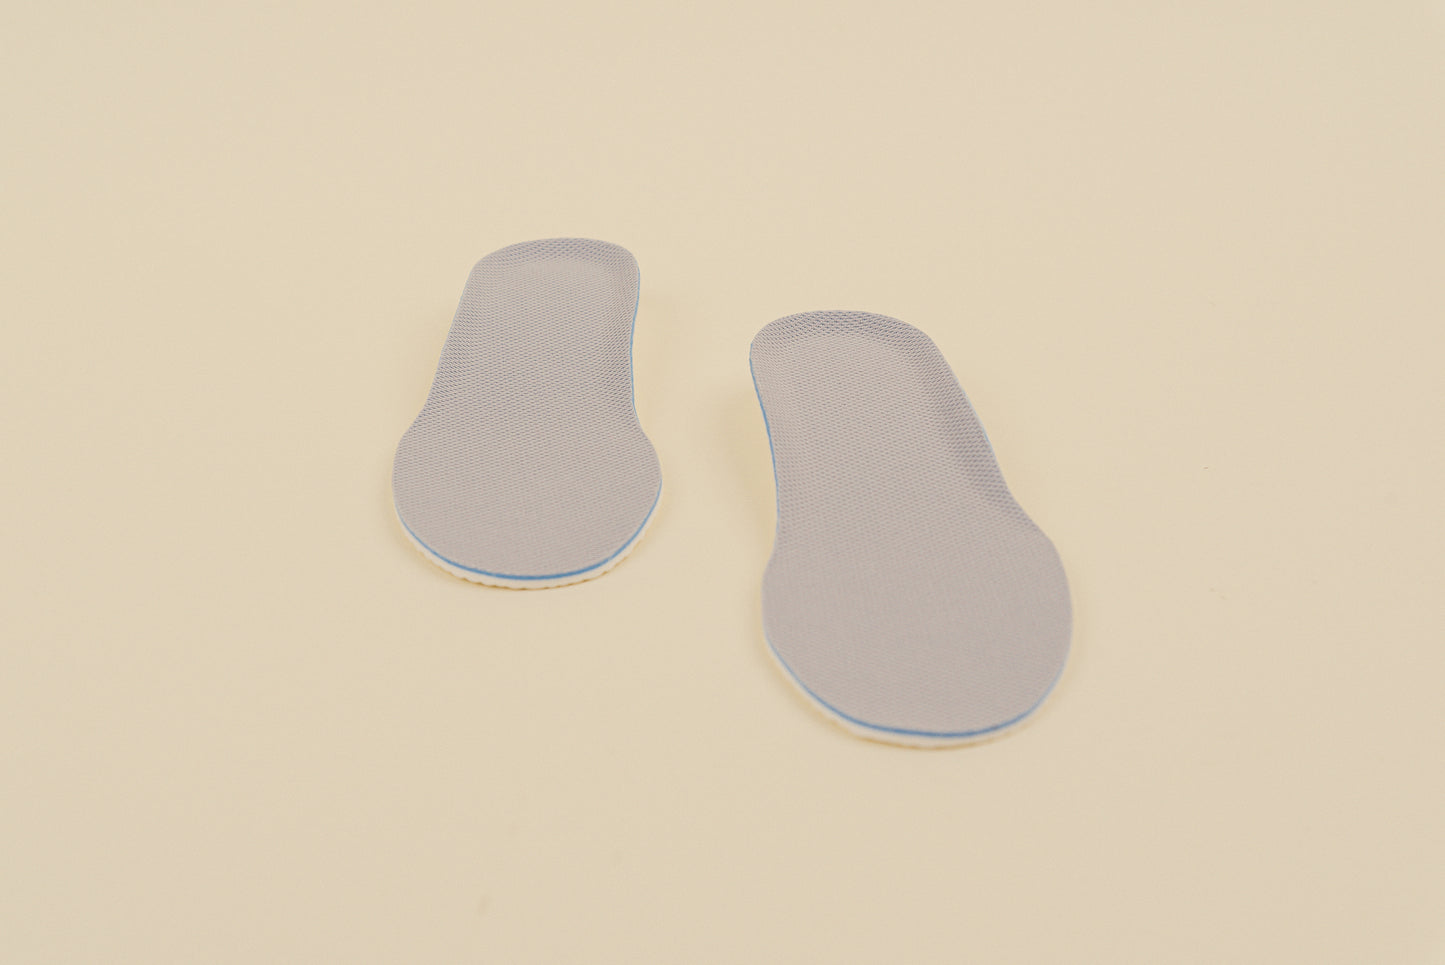 Brillaré foam sneaker insoles for sneakers, shoes, and boots. Boost style 2